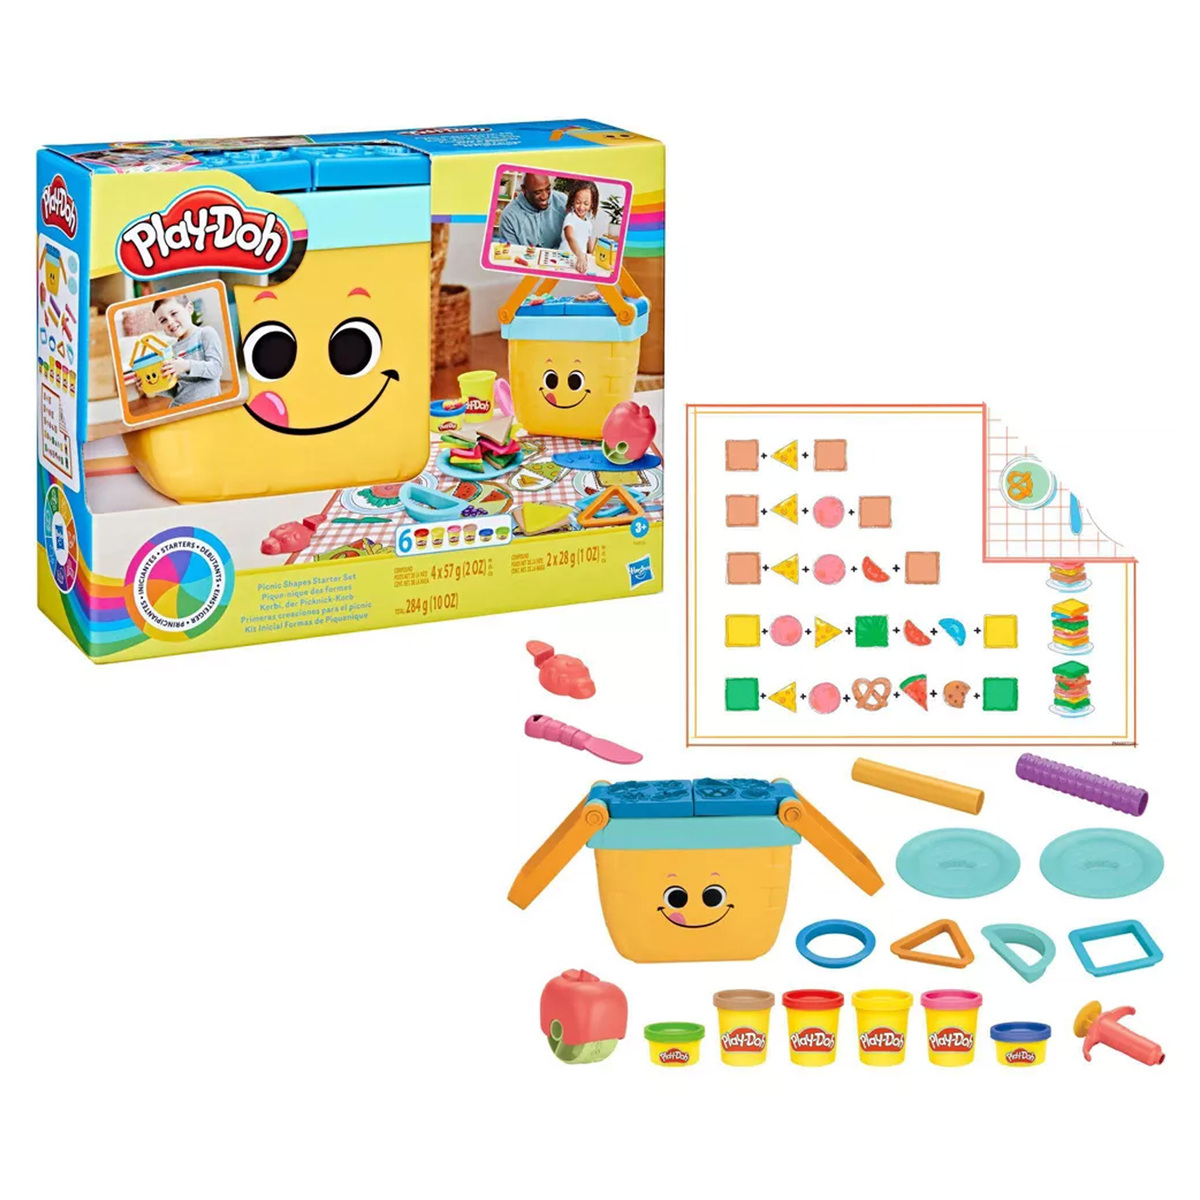 Playdoh Picnic Shapes Starter Set Art And Crafts Activity Toy for Kids, F6916